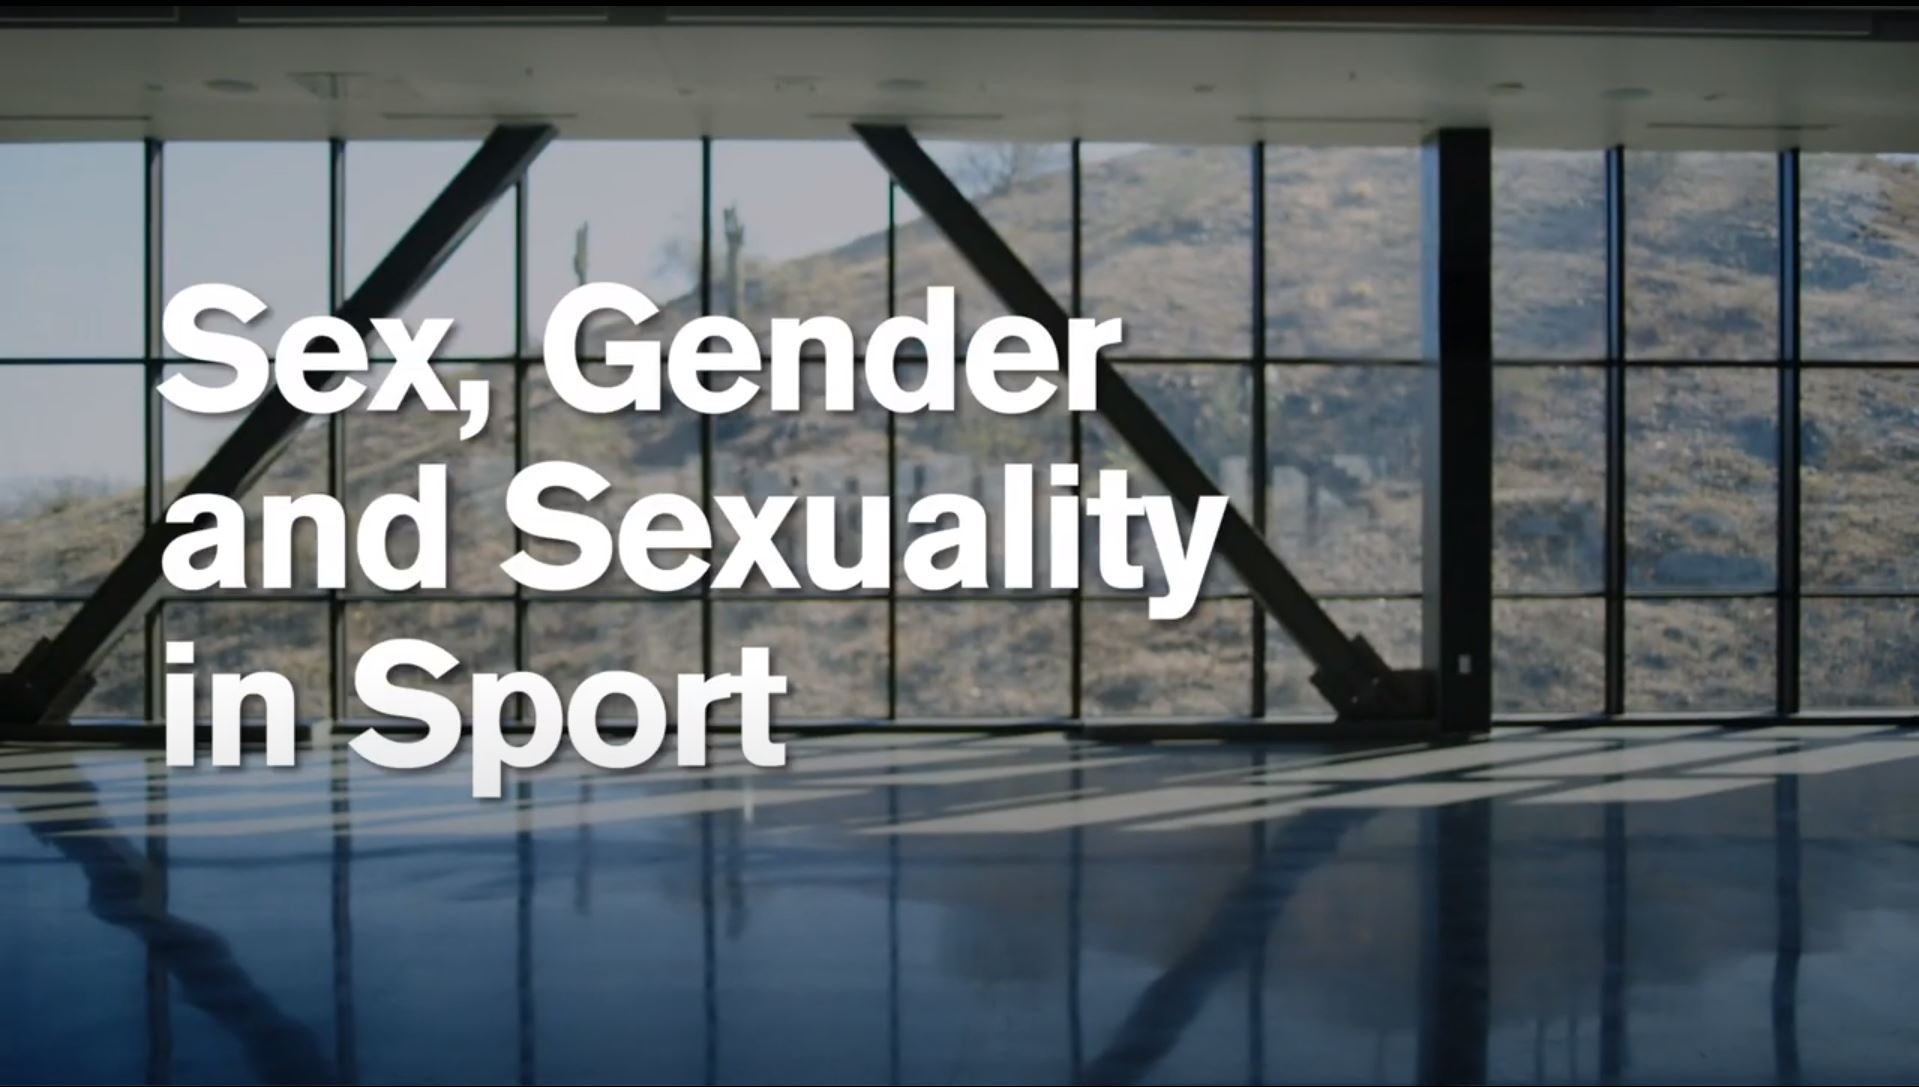 Sex, Gender and Sexuality in Sports